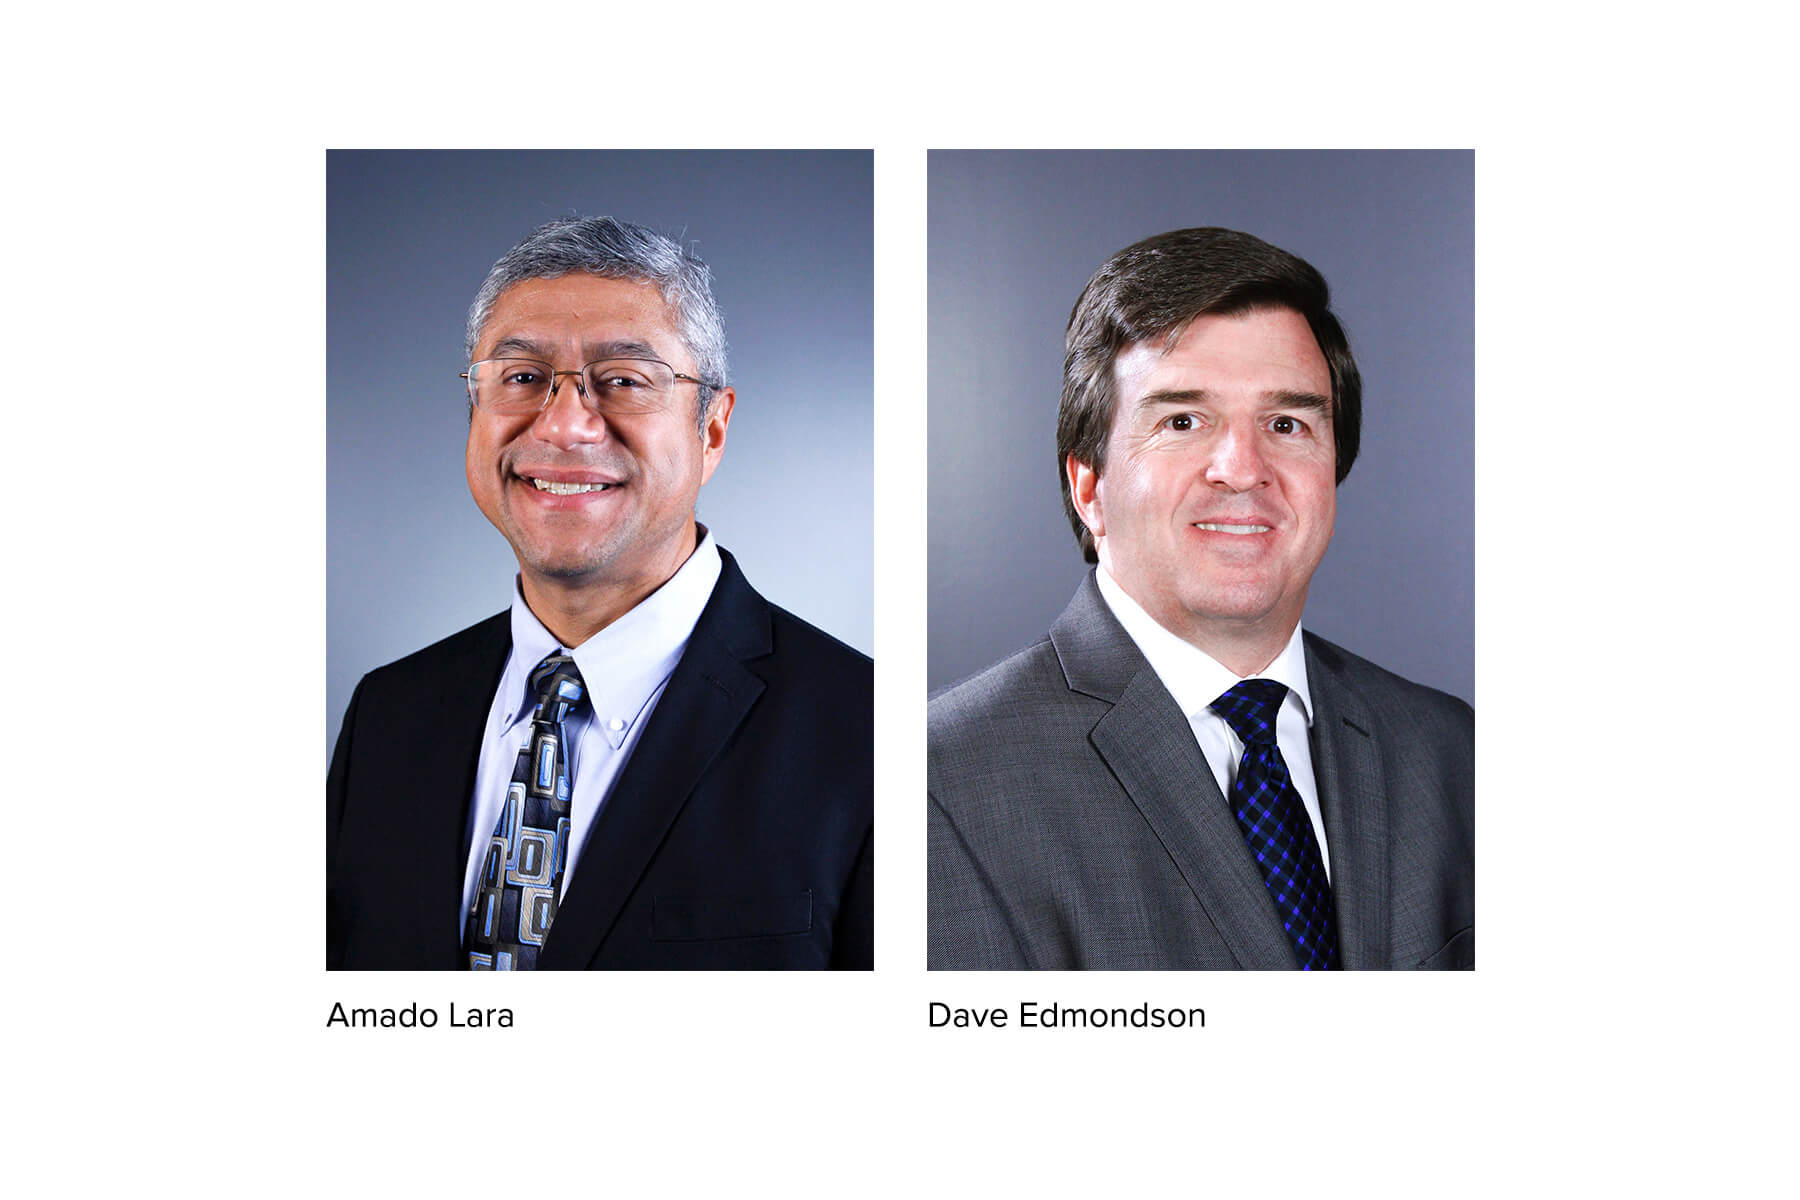 Recent personnel changes have strengthened Roland DGA Corporation's leadership team.